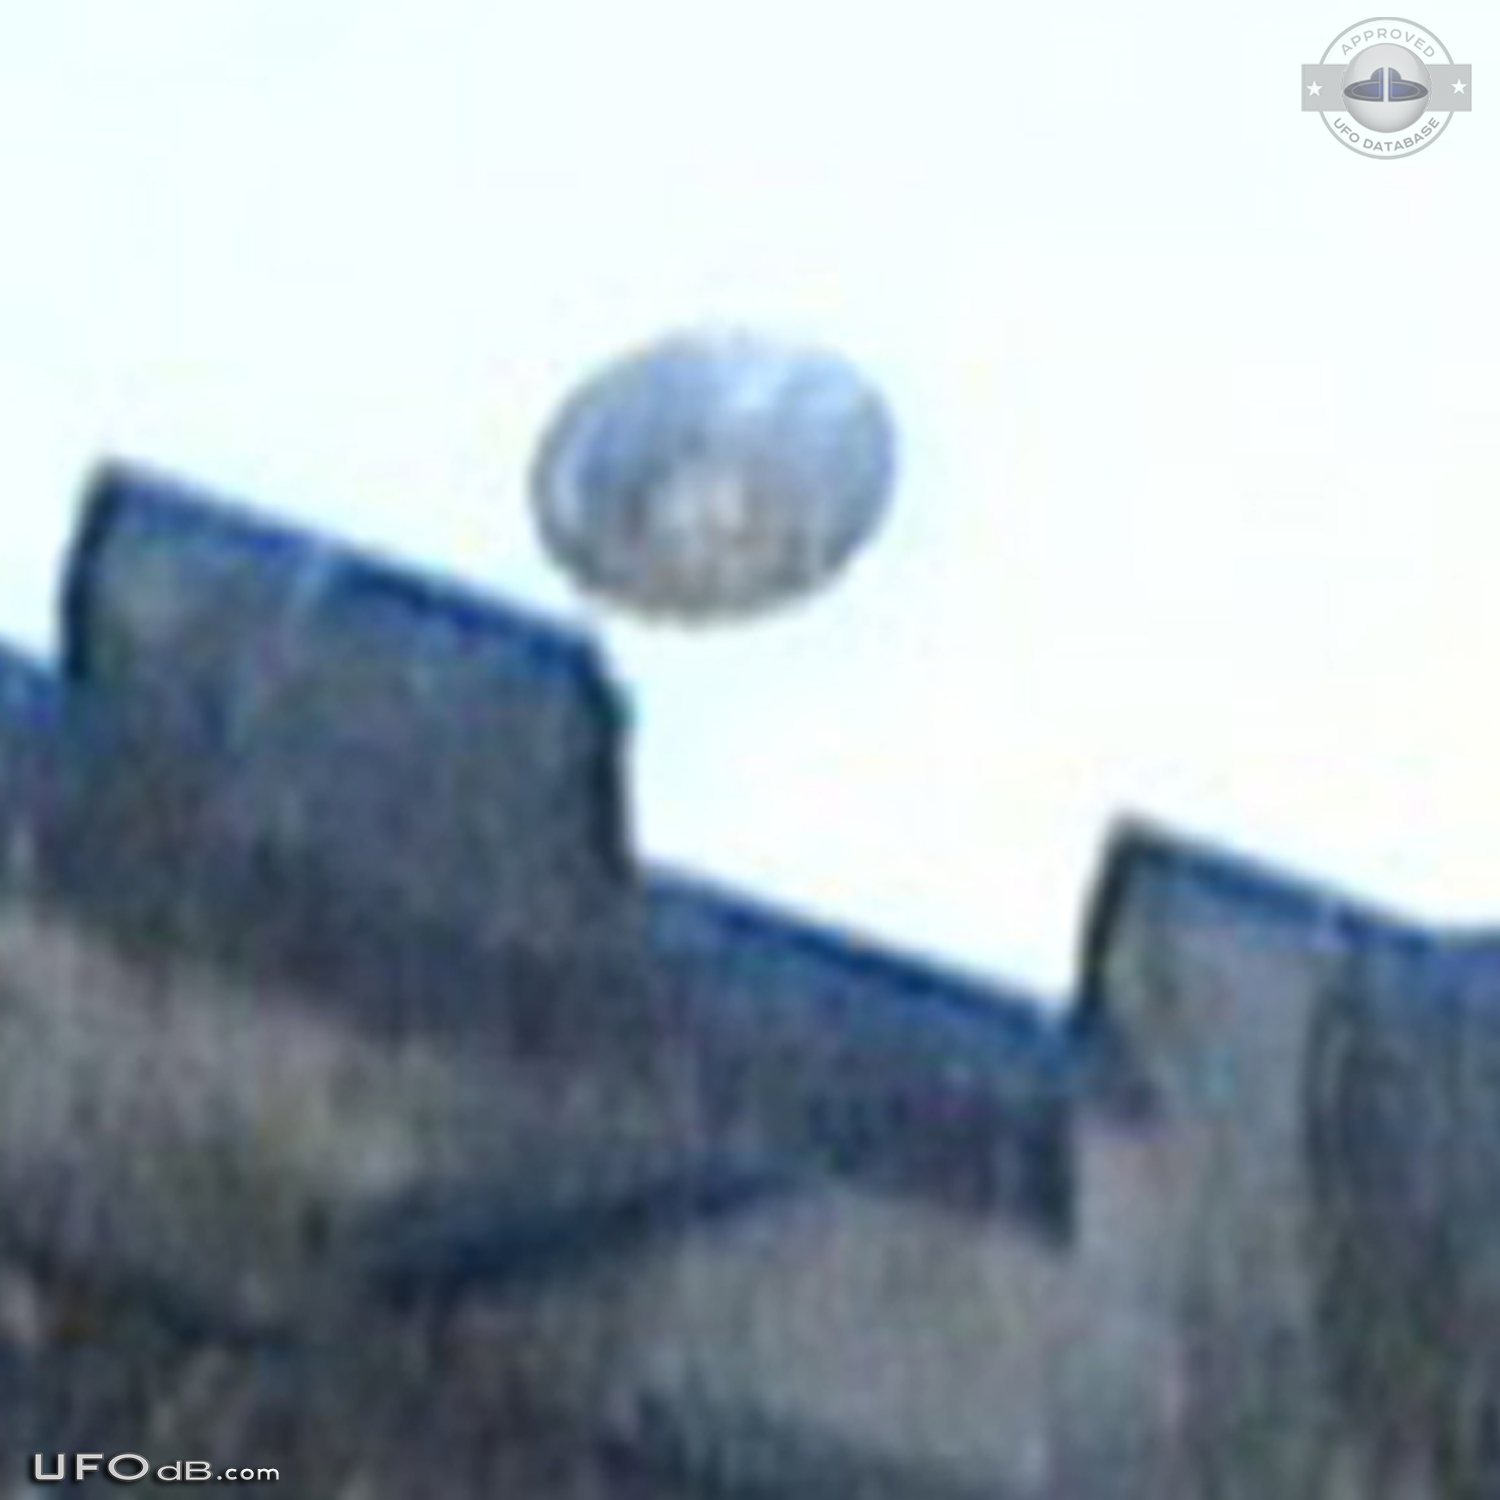 Saucer UFO seen right over Church in Norwich, Norfolk UK 2005 UFO Picture #587-4